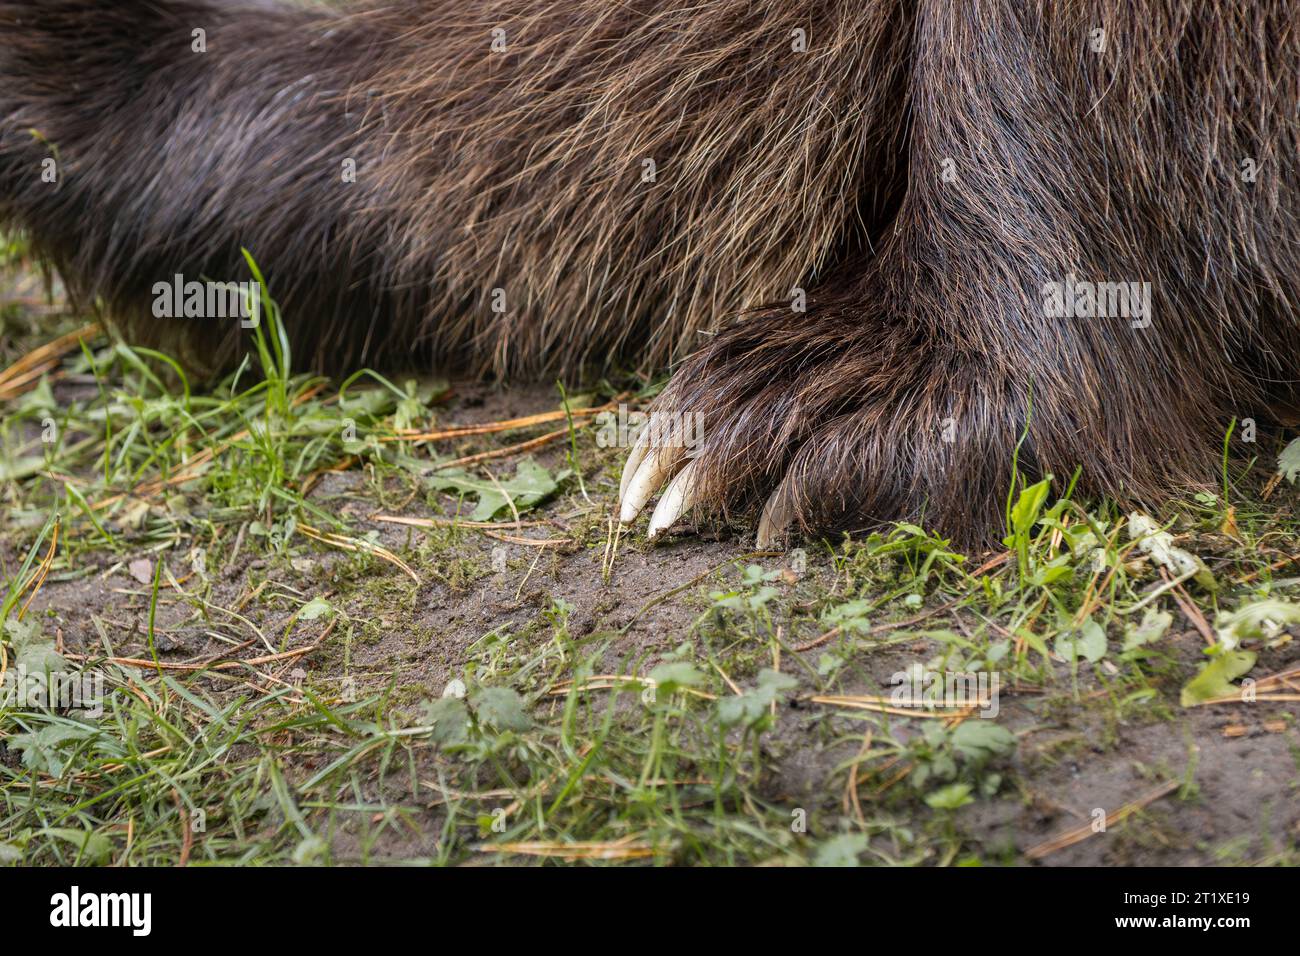 Paw of a sitting brown bear. The claws and the fur of the female Ursus arctos are visible in a close up. The dark brown hair is covering the forepaw. Stock Photo